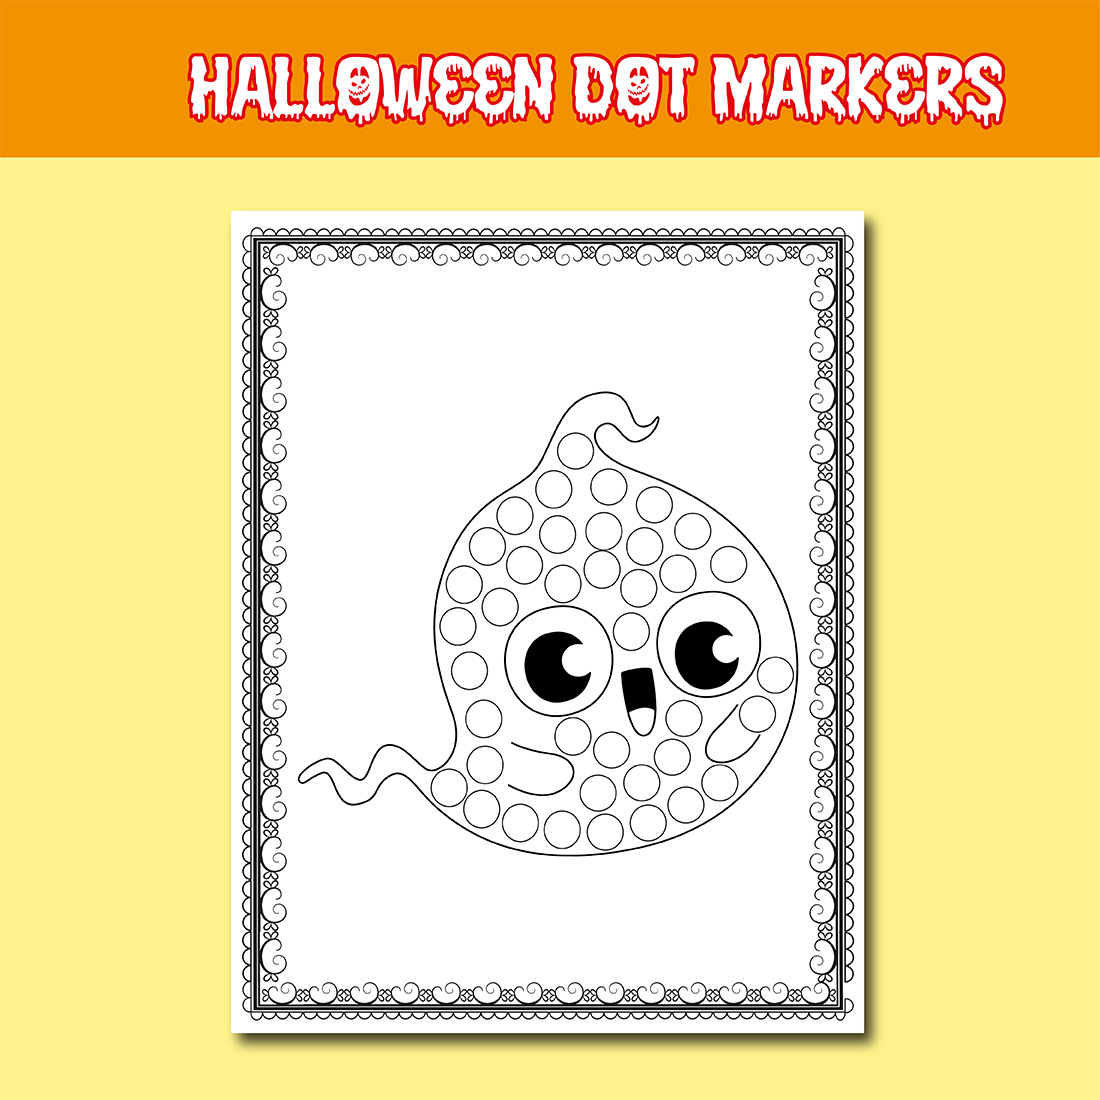 20 Pages Halloween Dot Markers Activity Book for kids fun.